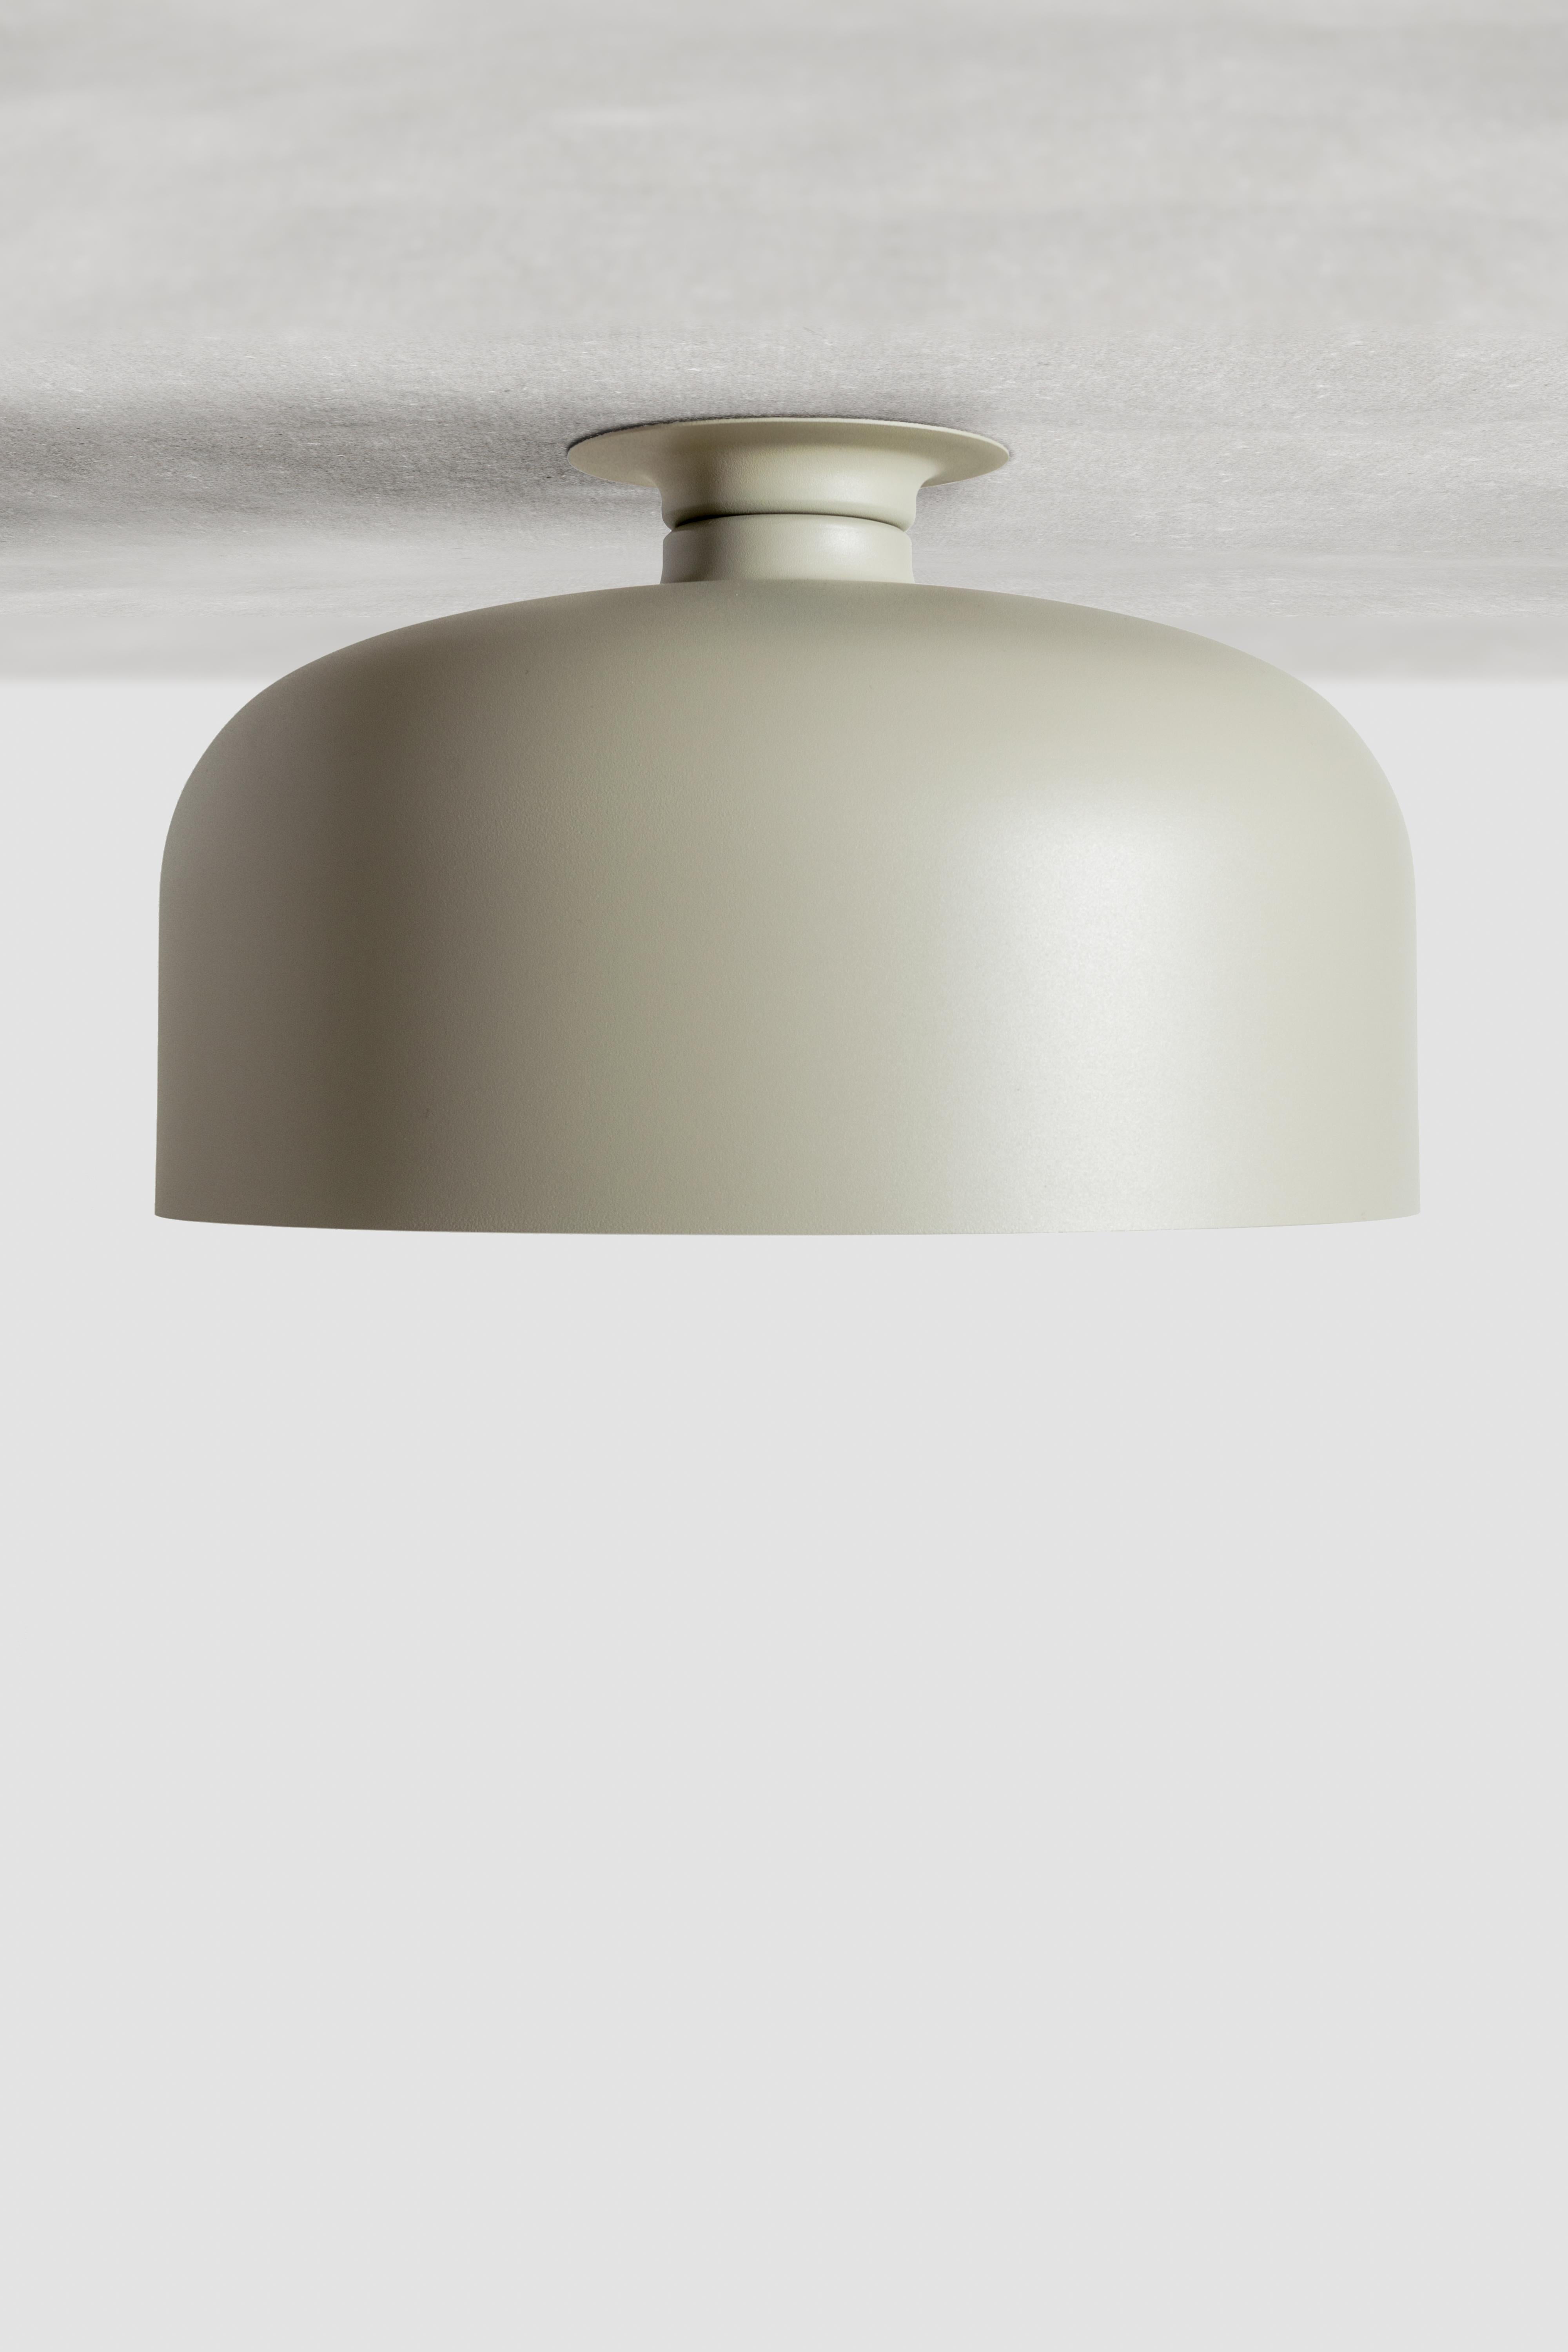 SPOTLIGHT VOLUMES, ceiling lamp / wall lamp
Design: Lukas Peet, Editor: ANDLight
UL Listed

Model shown: B

Inspired by spotlights, the Spotlight Volumes series is based on four unique shade profiles which combine in various ways. While designed